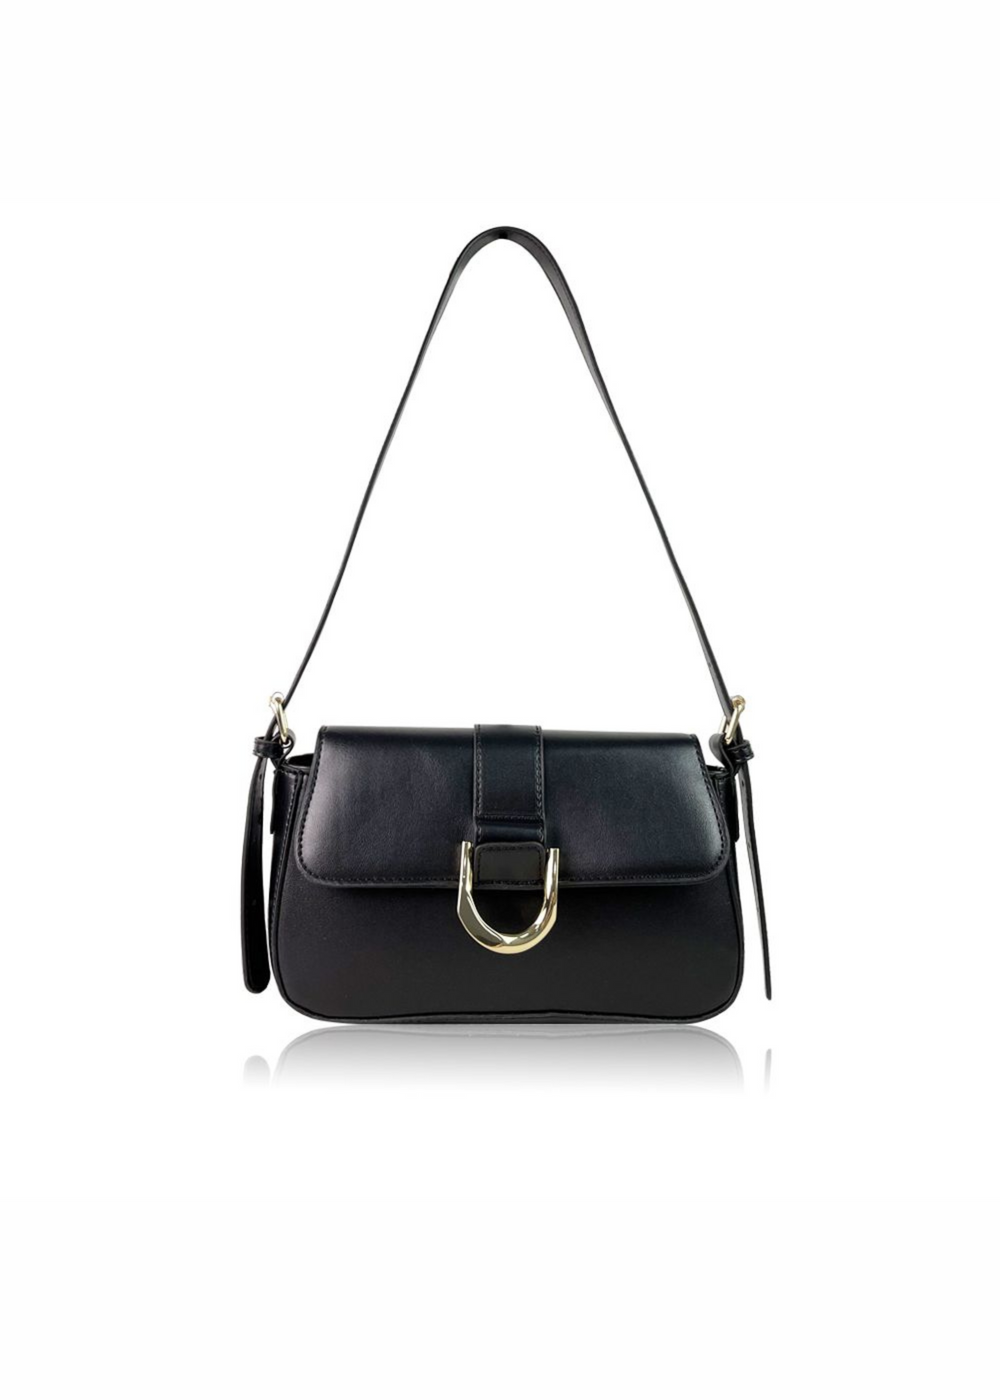 ALOE SHOULDER BAG WITH BUCKLE DETAIL IN BLACK FAUX LEATHER